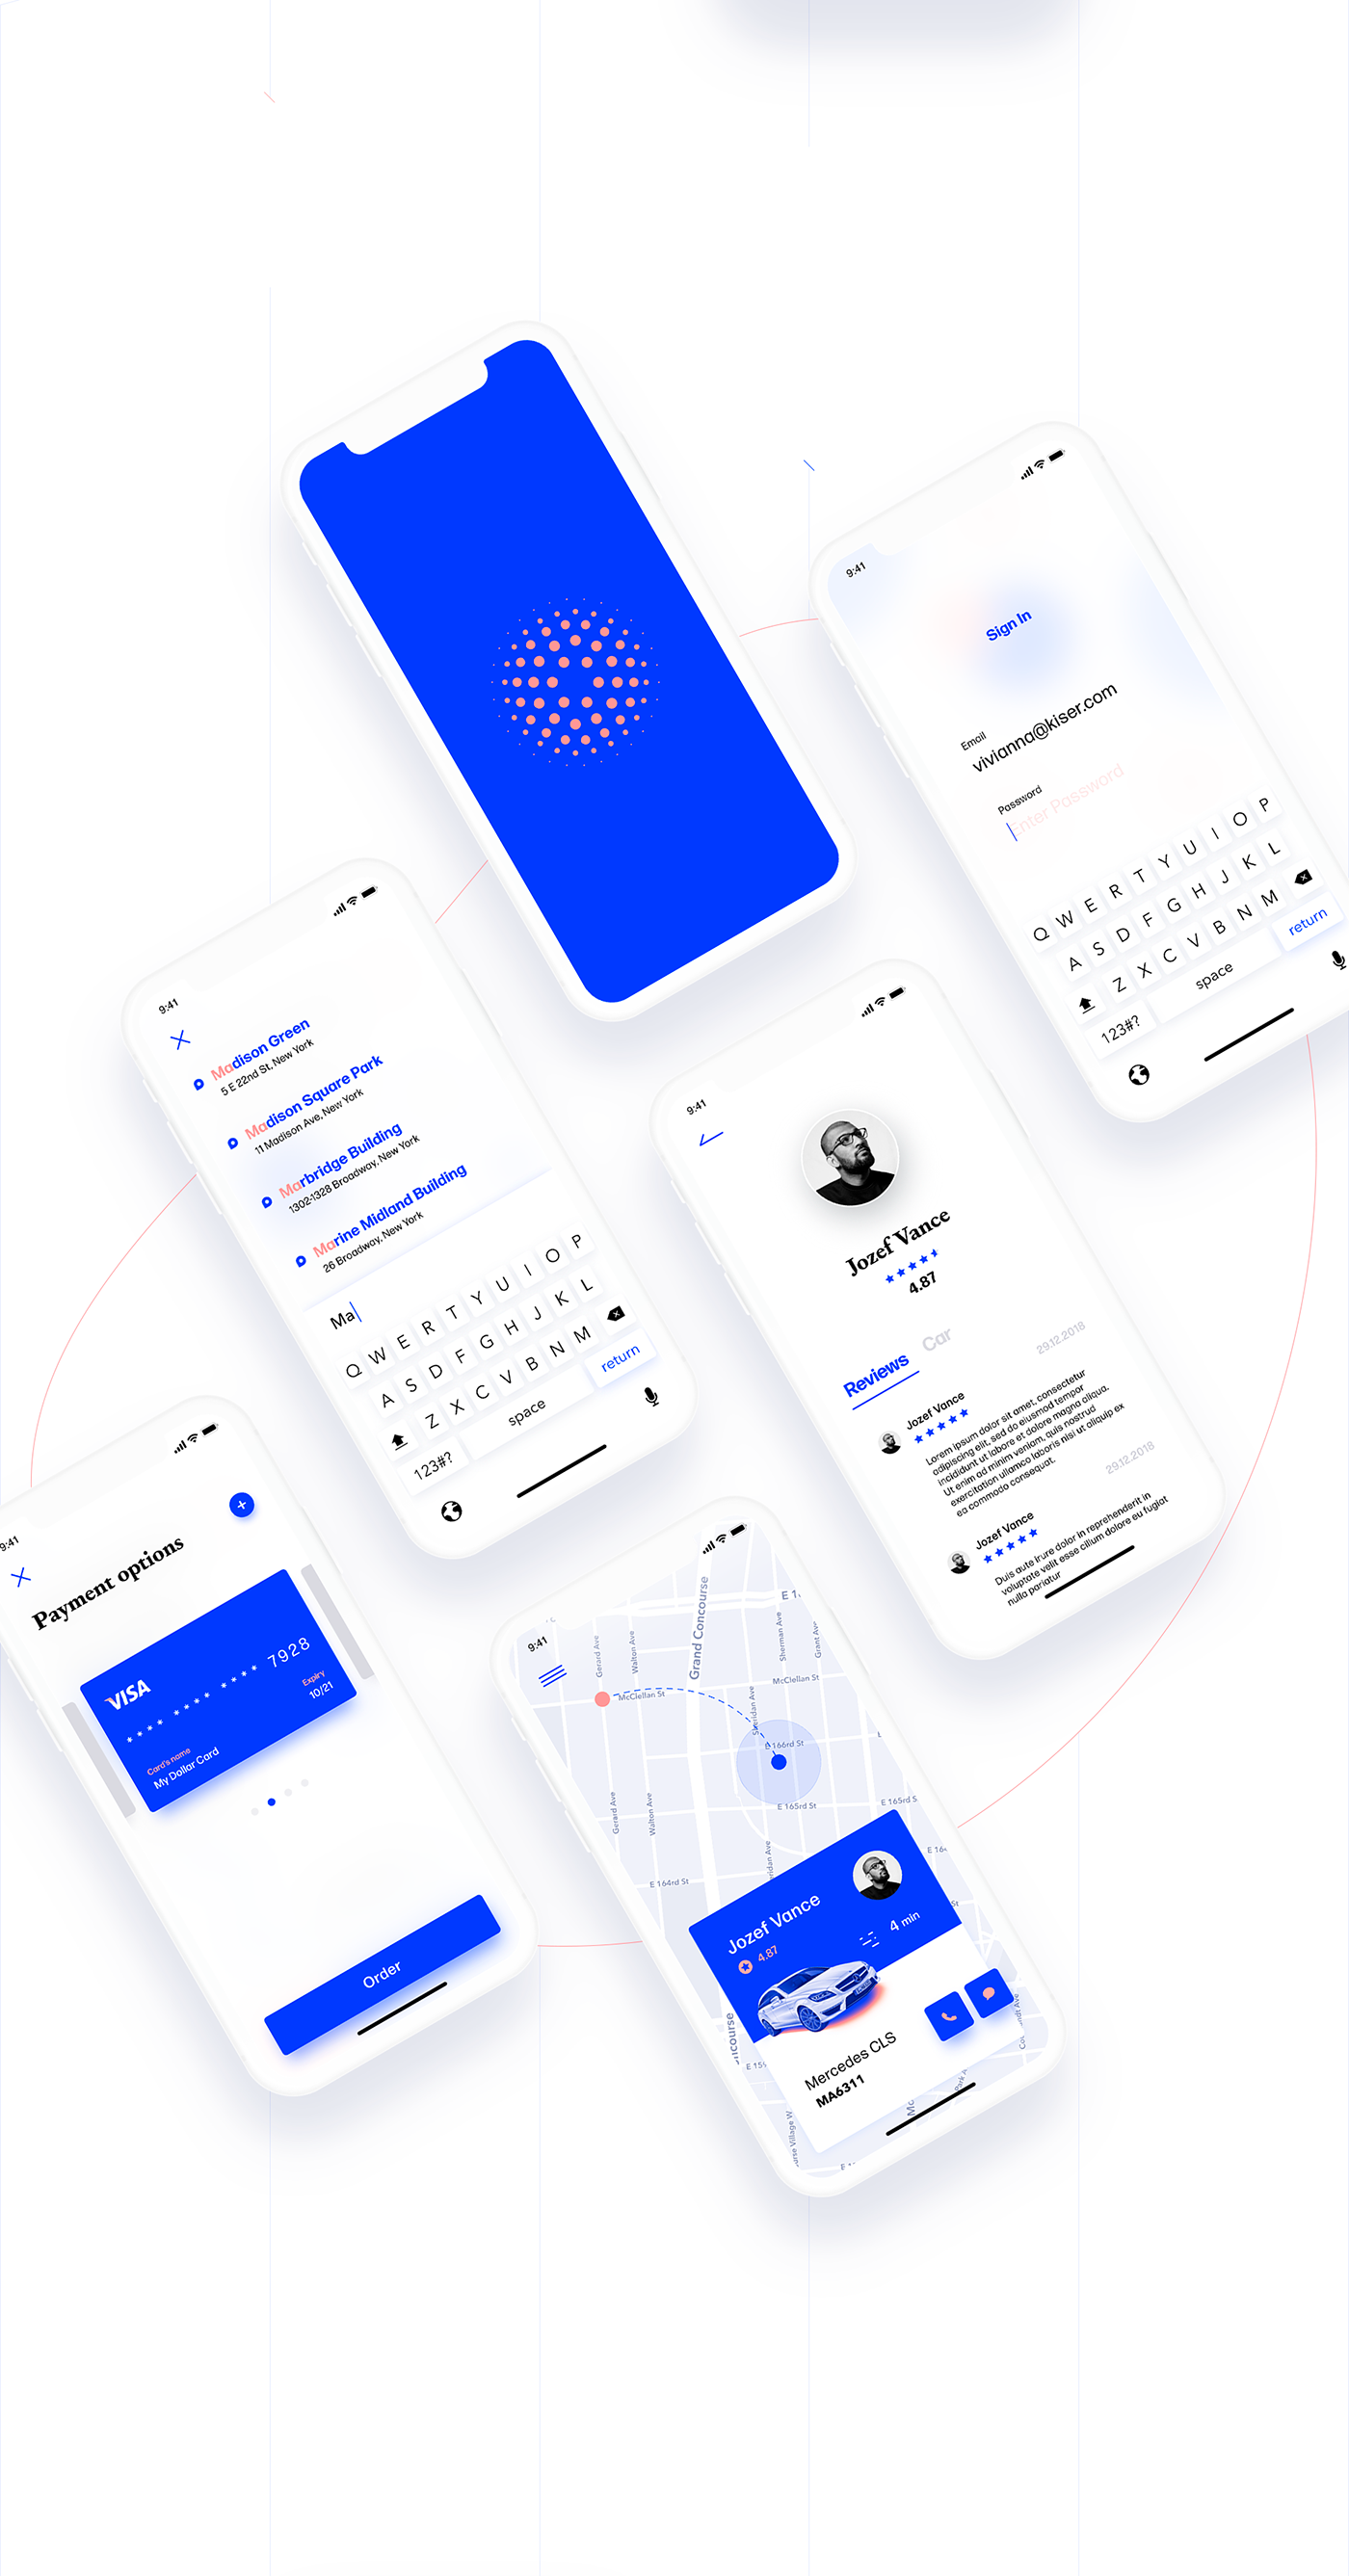 ui ux iphone android application light clean animation  research Prototyping user interface